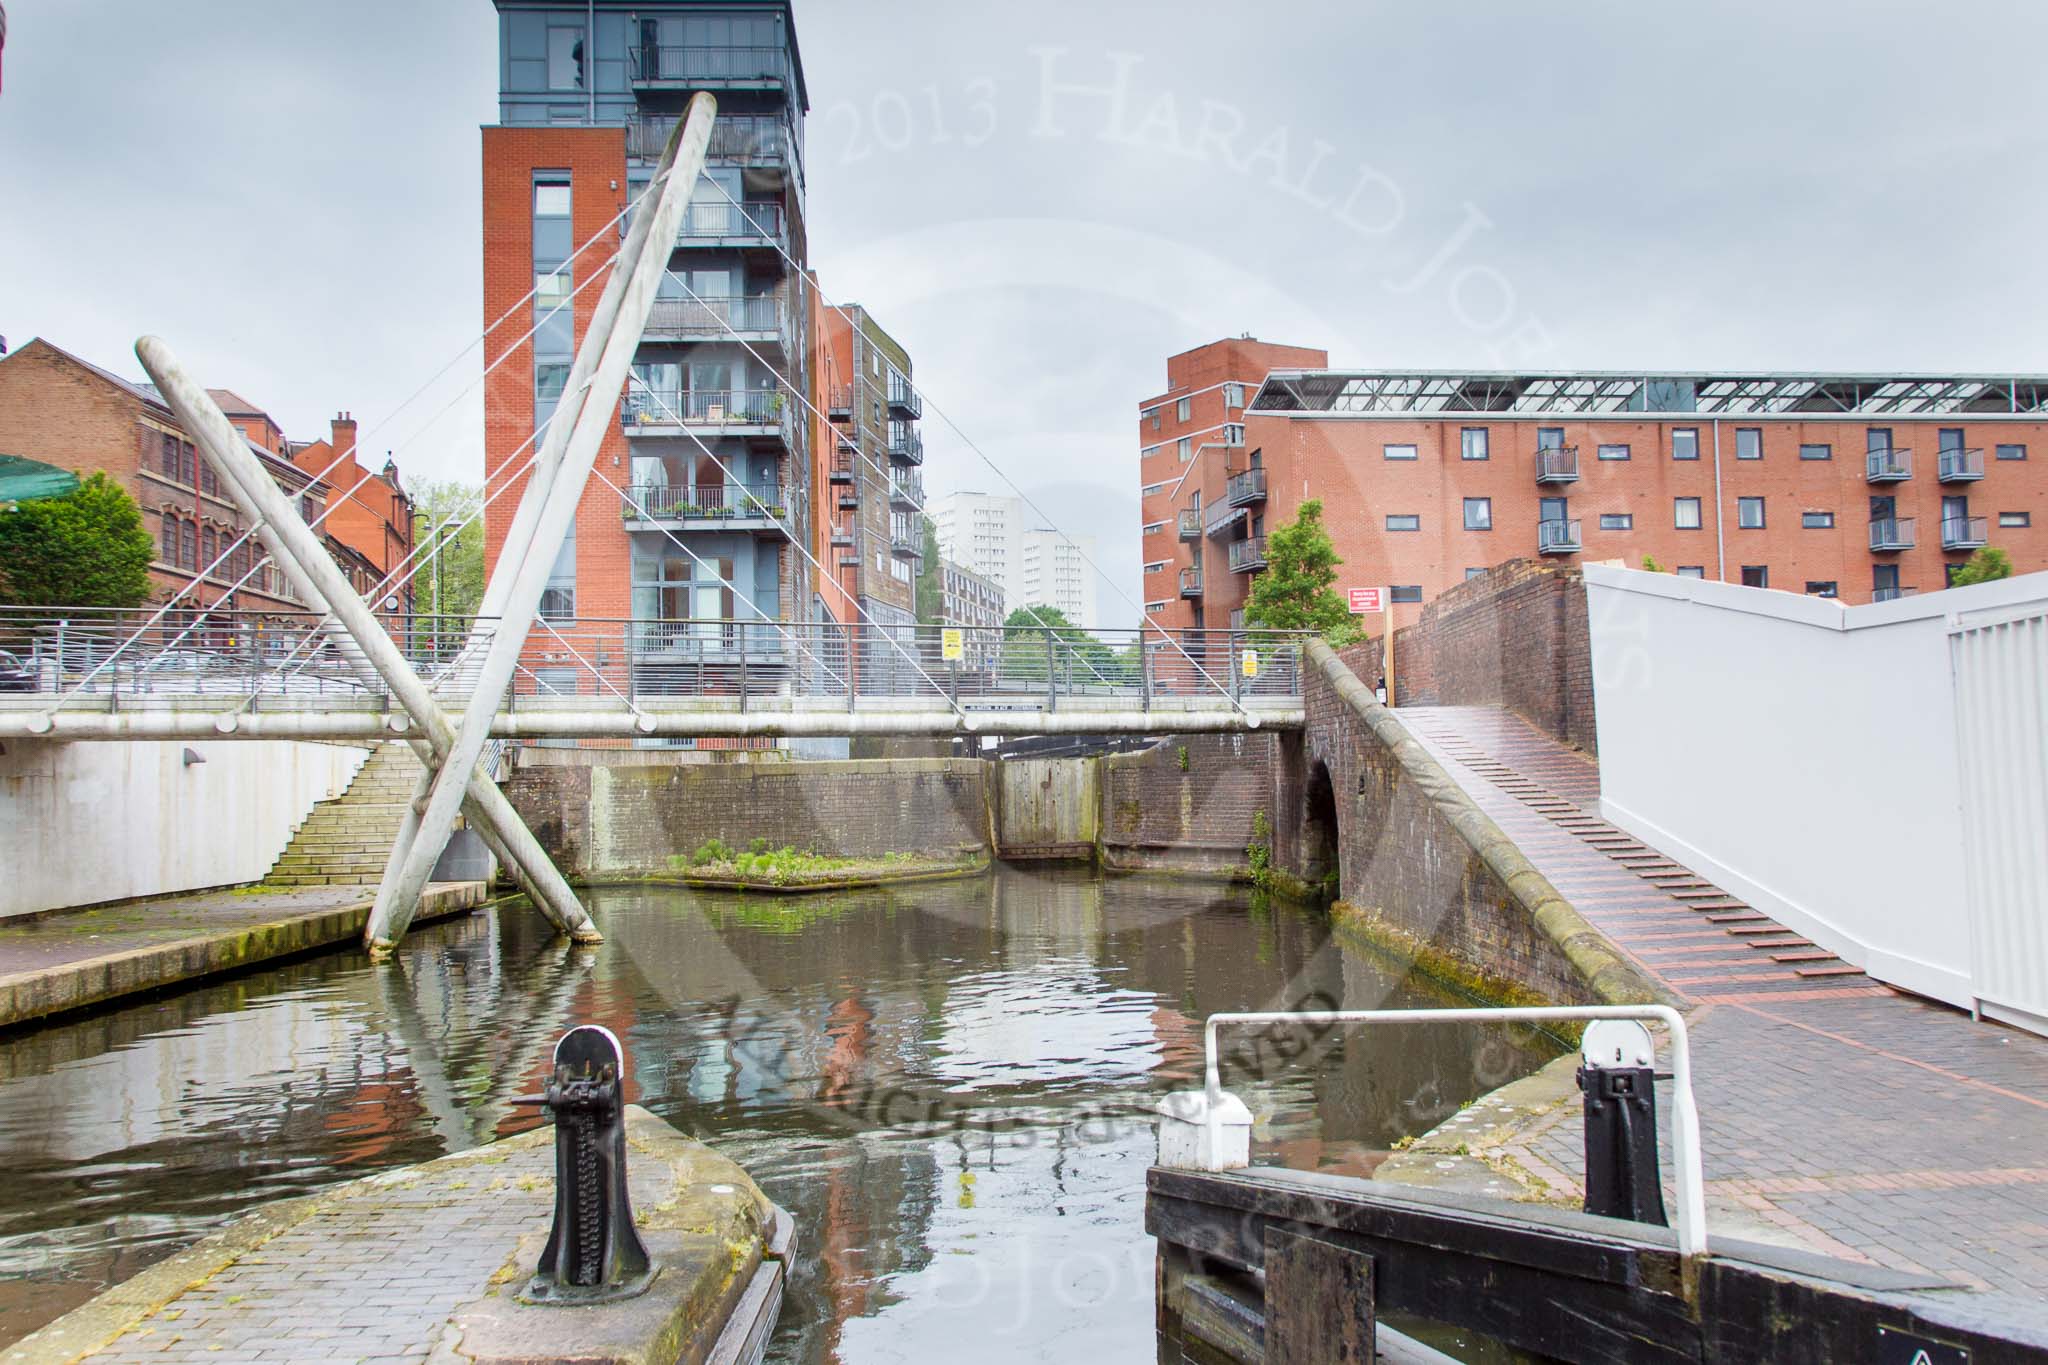 BCN Marathon Challenge 2014: A very modern footbridge over the Birmingham & Fazeley Canal at the Farmers Bridge locks, with old industry on the right. The factory bridge on the right used once served a saw mill..
Birmingham Canal Navigation,


United Kingdom,
on 23 May 2014 at 14:20, image #23